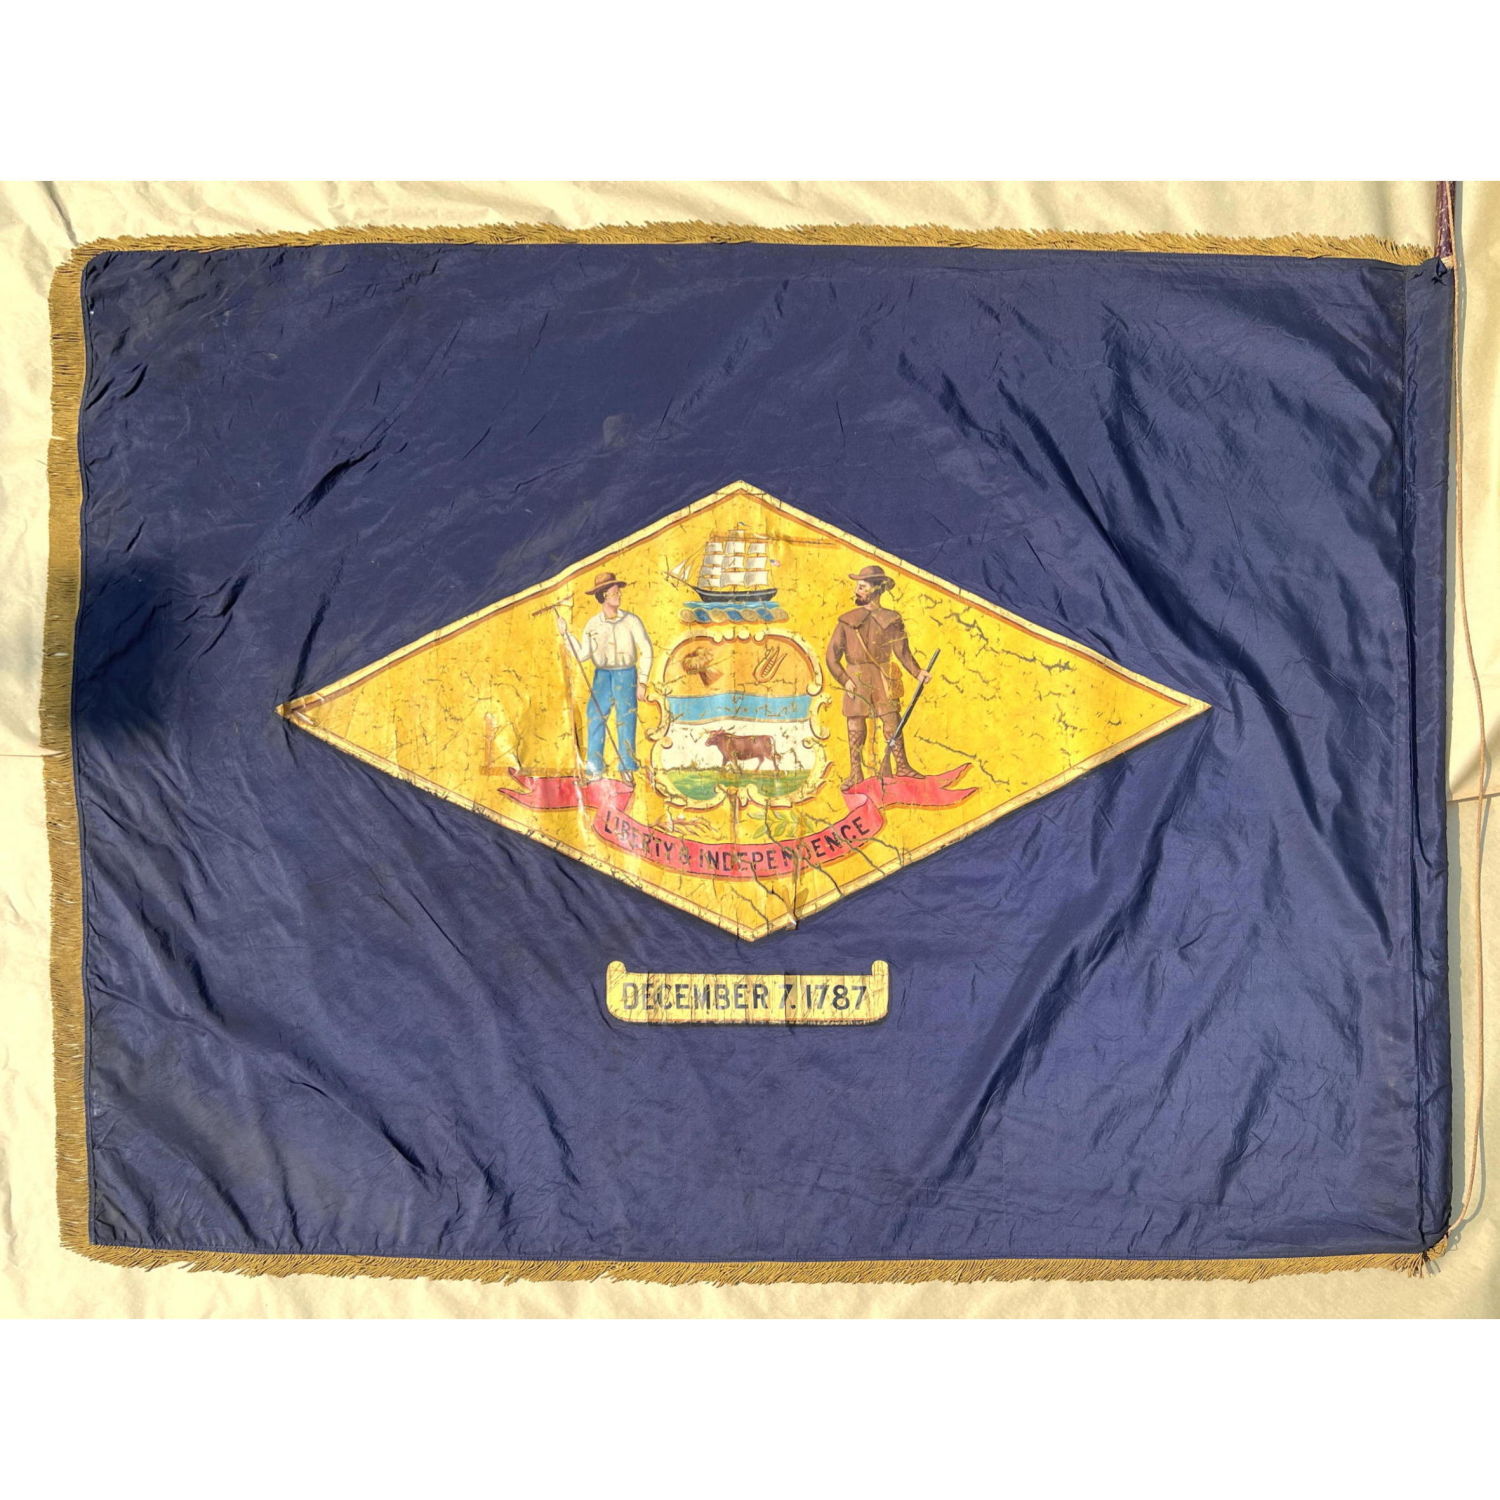 Early Delaware state flag from 2b91c3